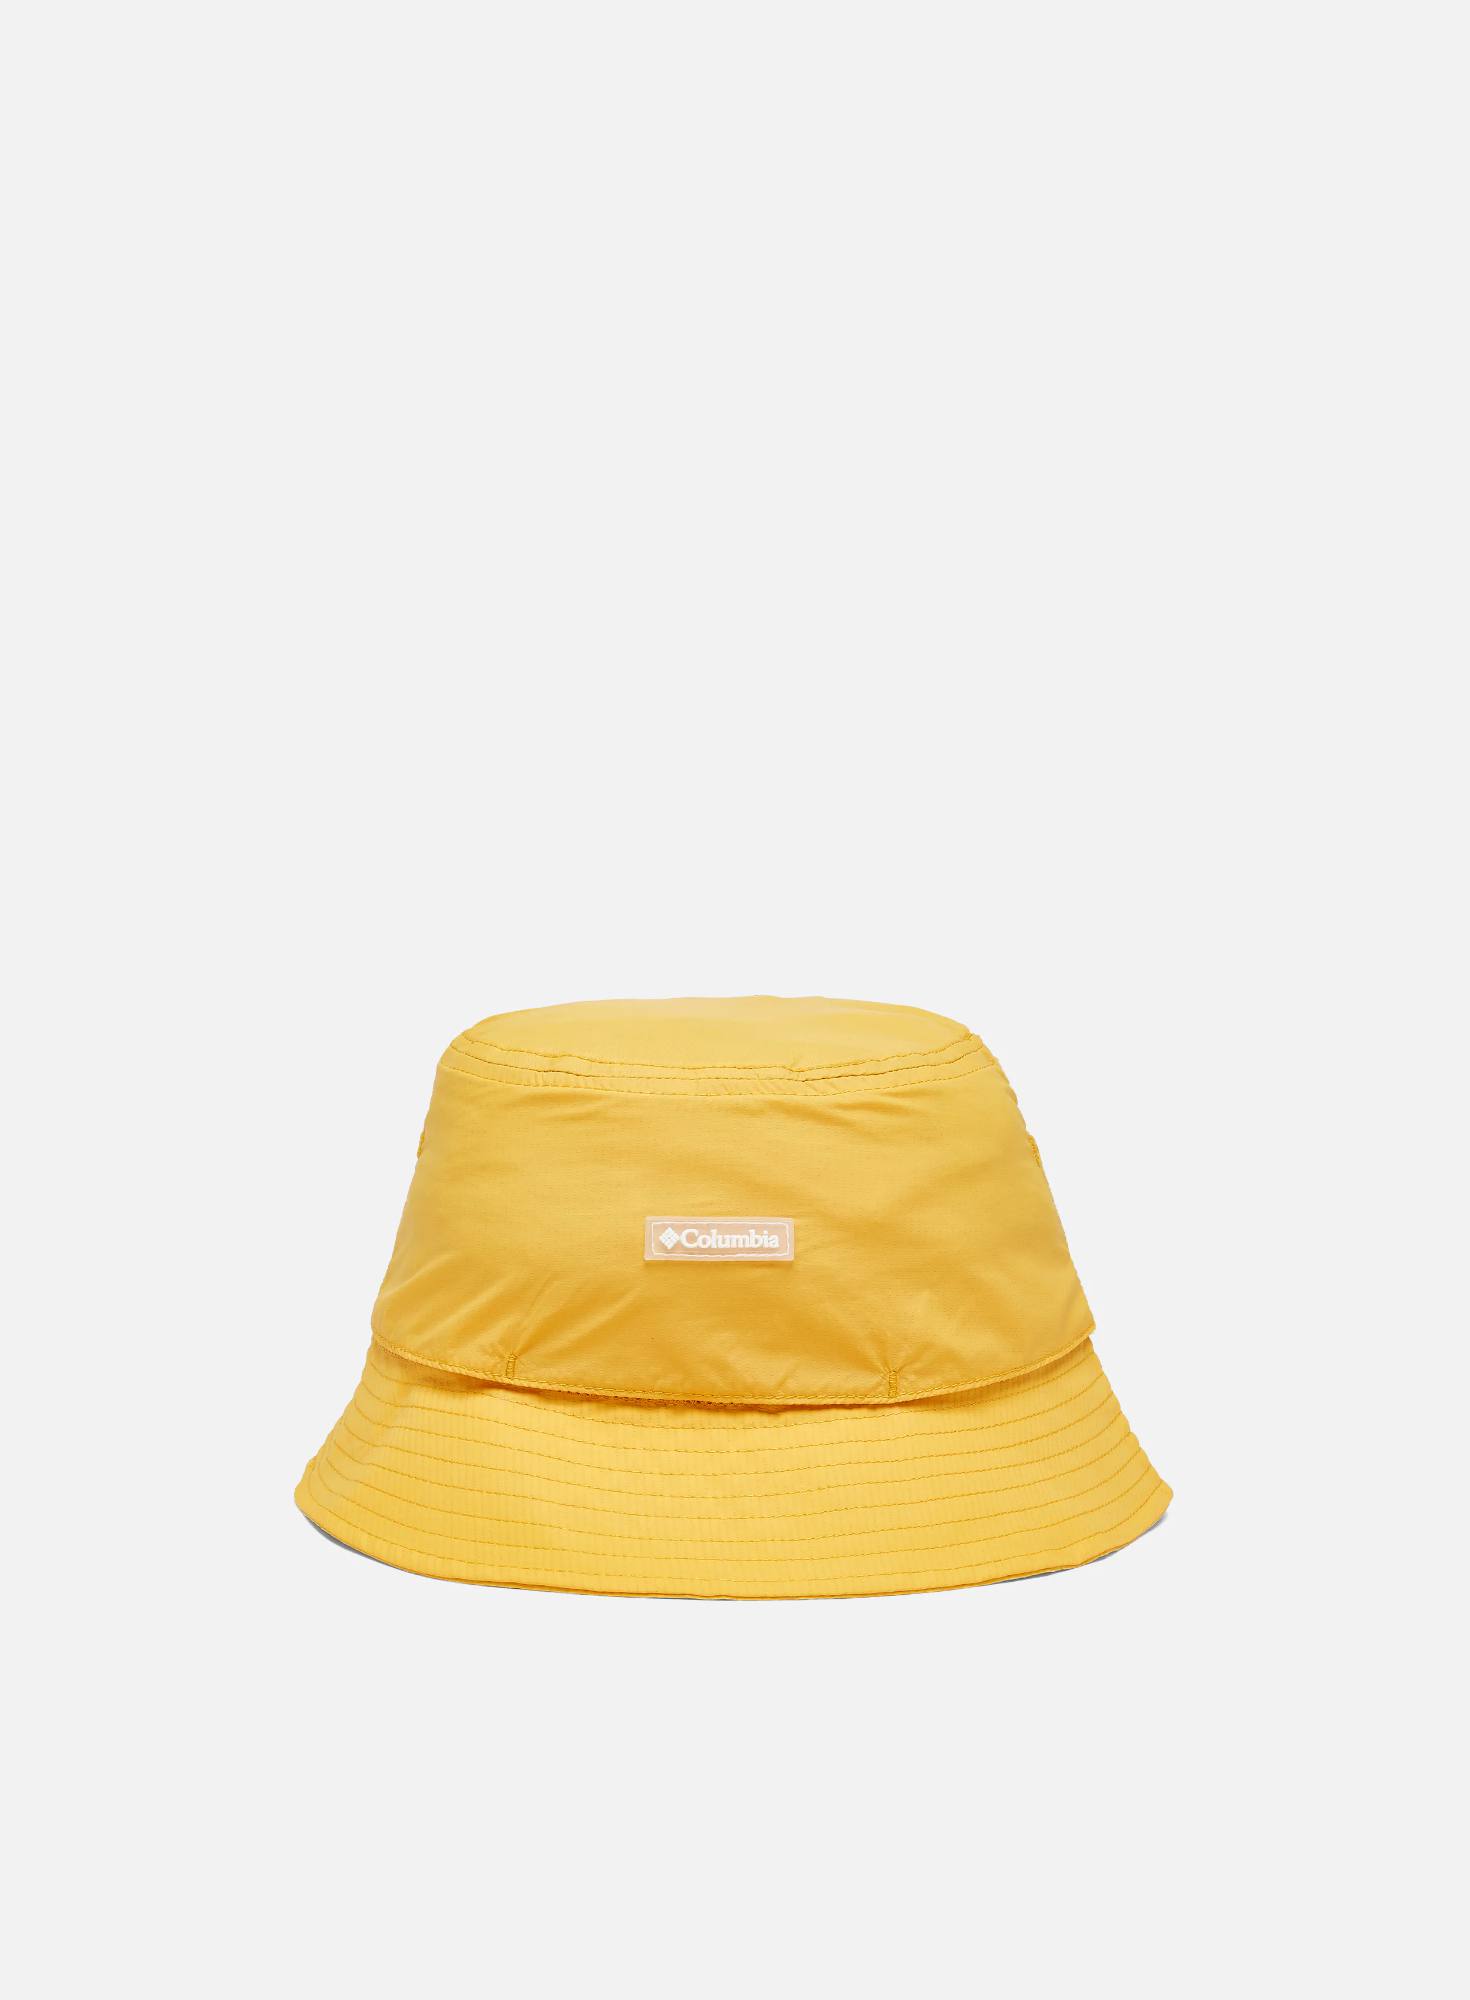 Columbia Punchbowl Vent Bucket Gold S/M